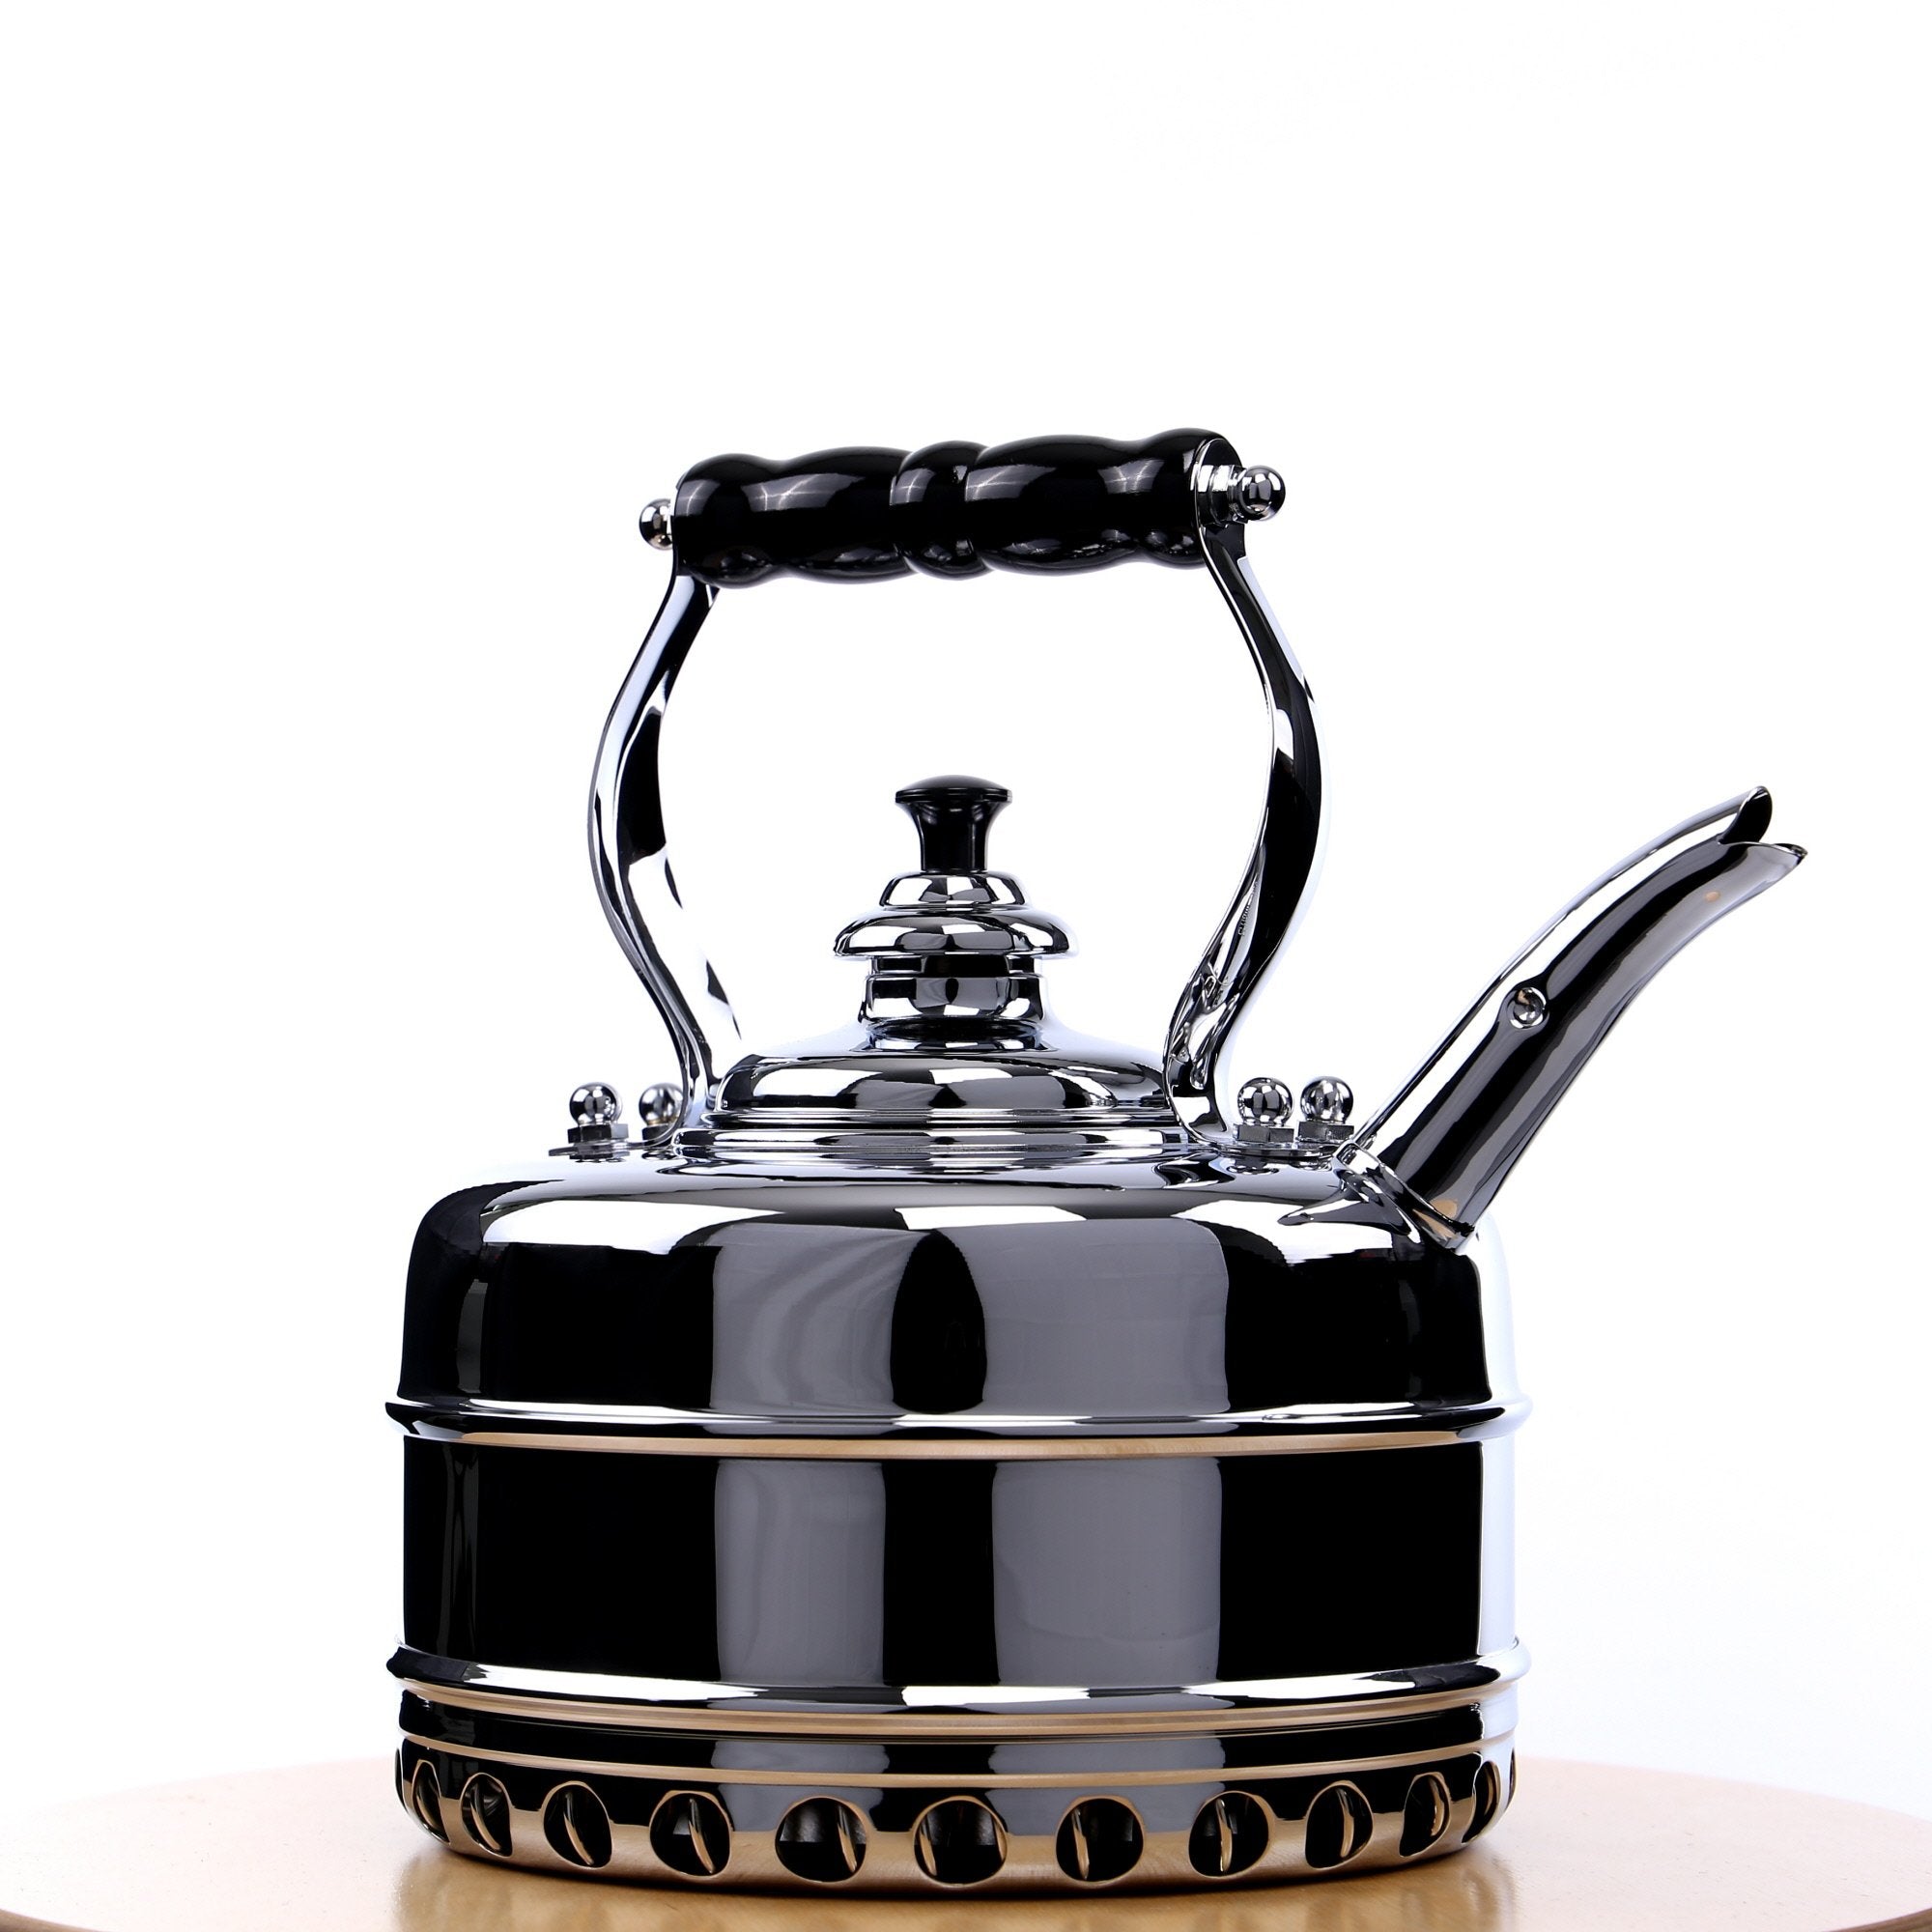 Tea Kettles: Prepare the perfect cup of tea with tea kettles for gas stoves